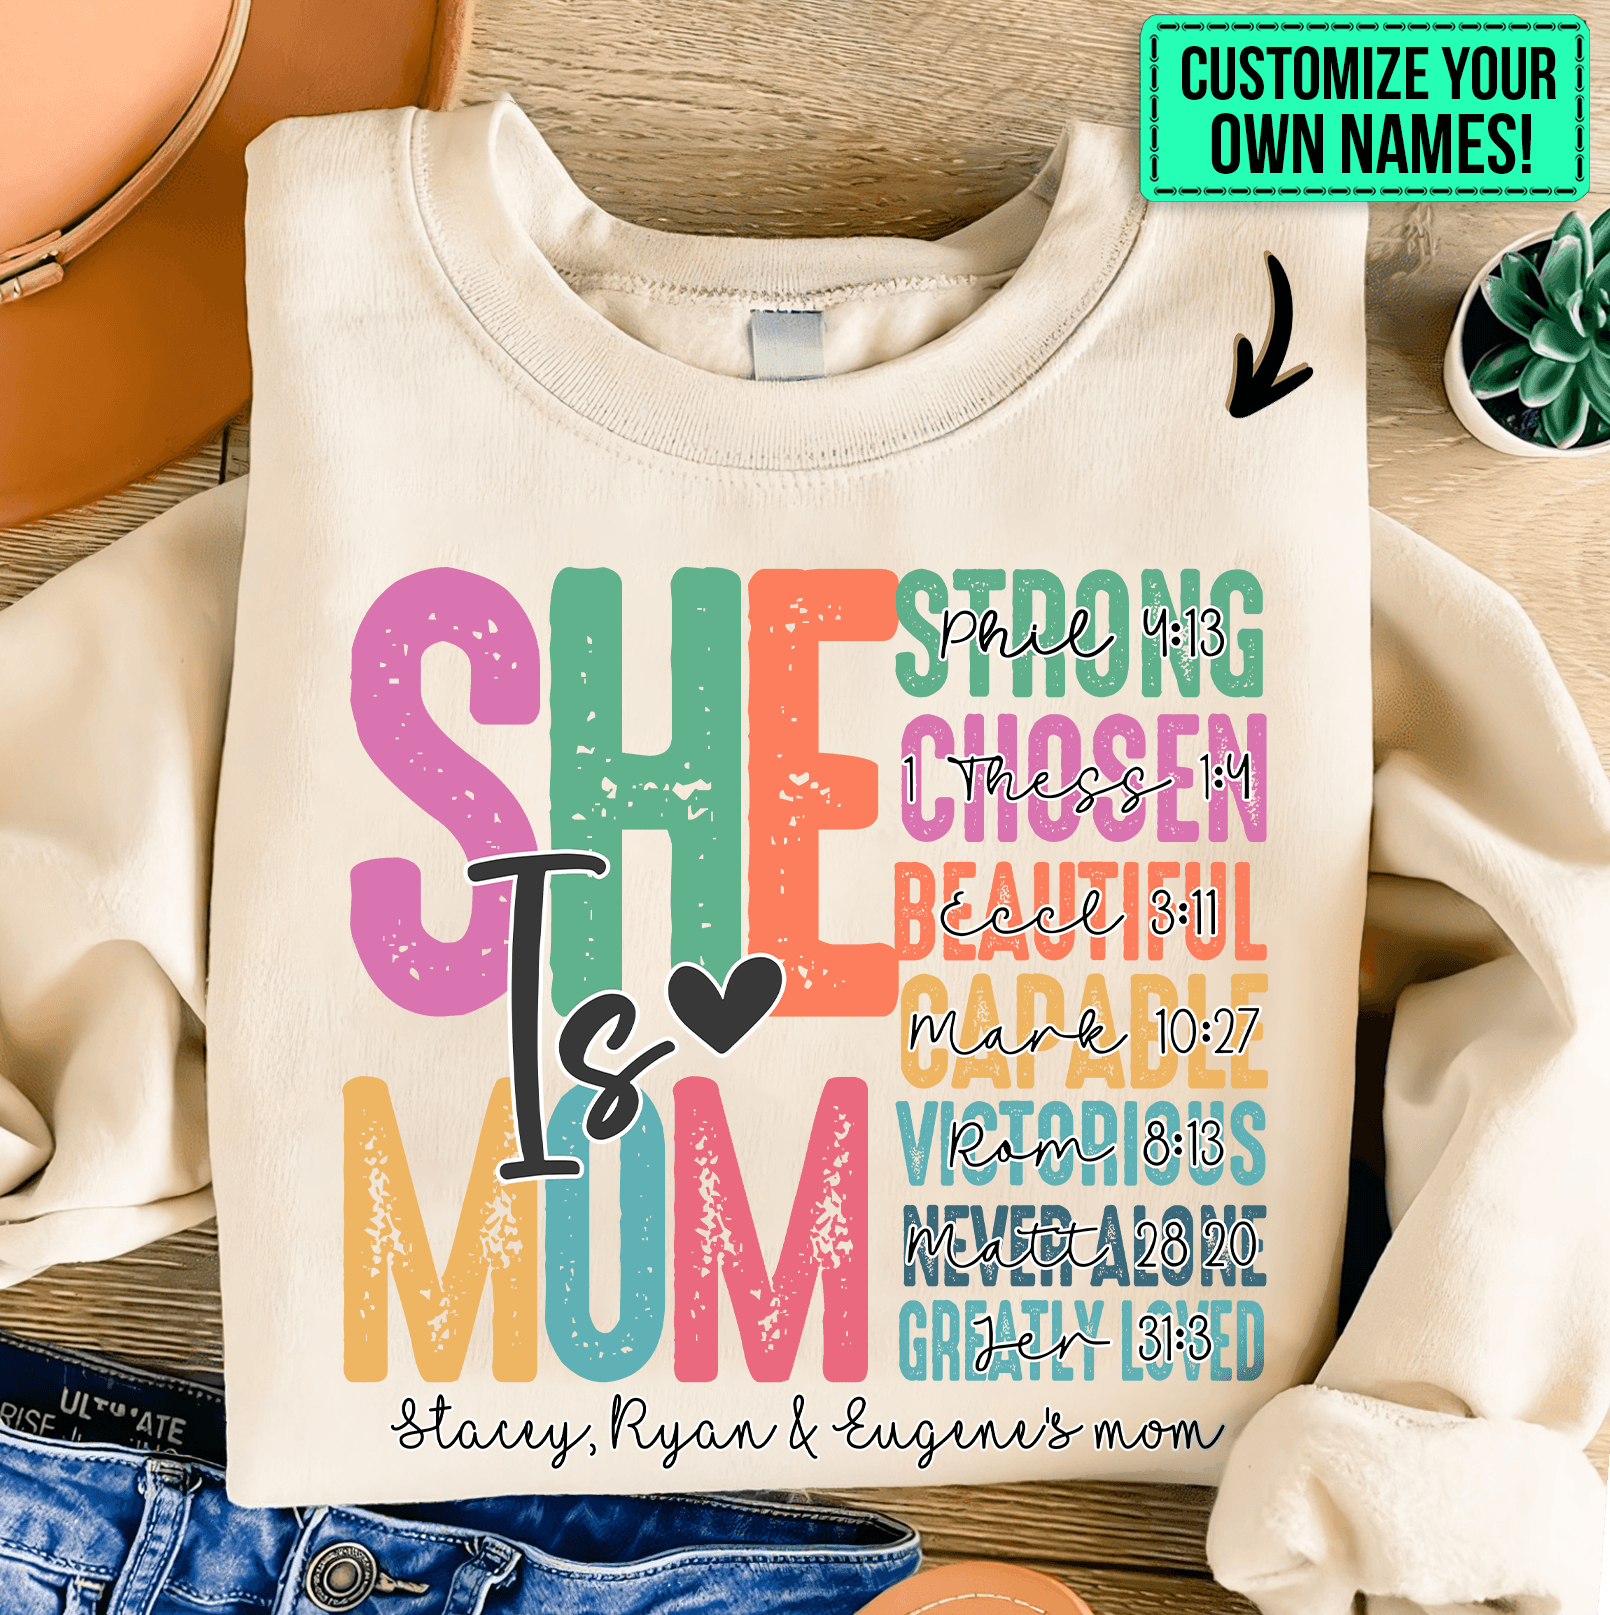 She is Mom, Bible Verse | Personalized Gift For Mom, Mother, Grandma, Grandmother, Mother's Day, Valentine's Day Family